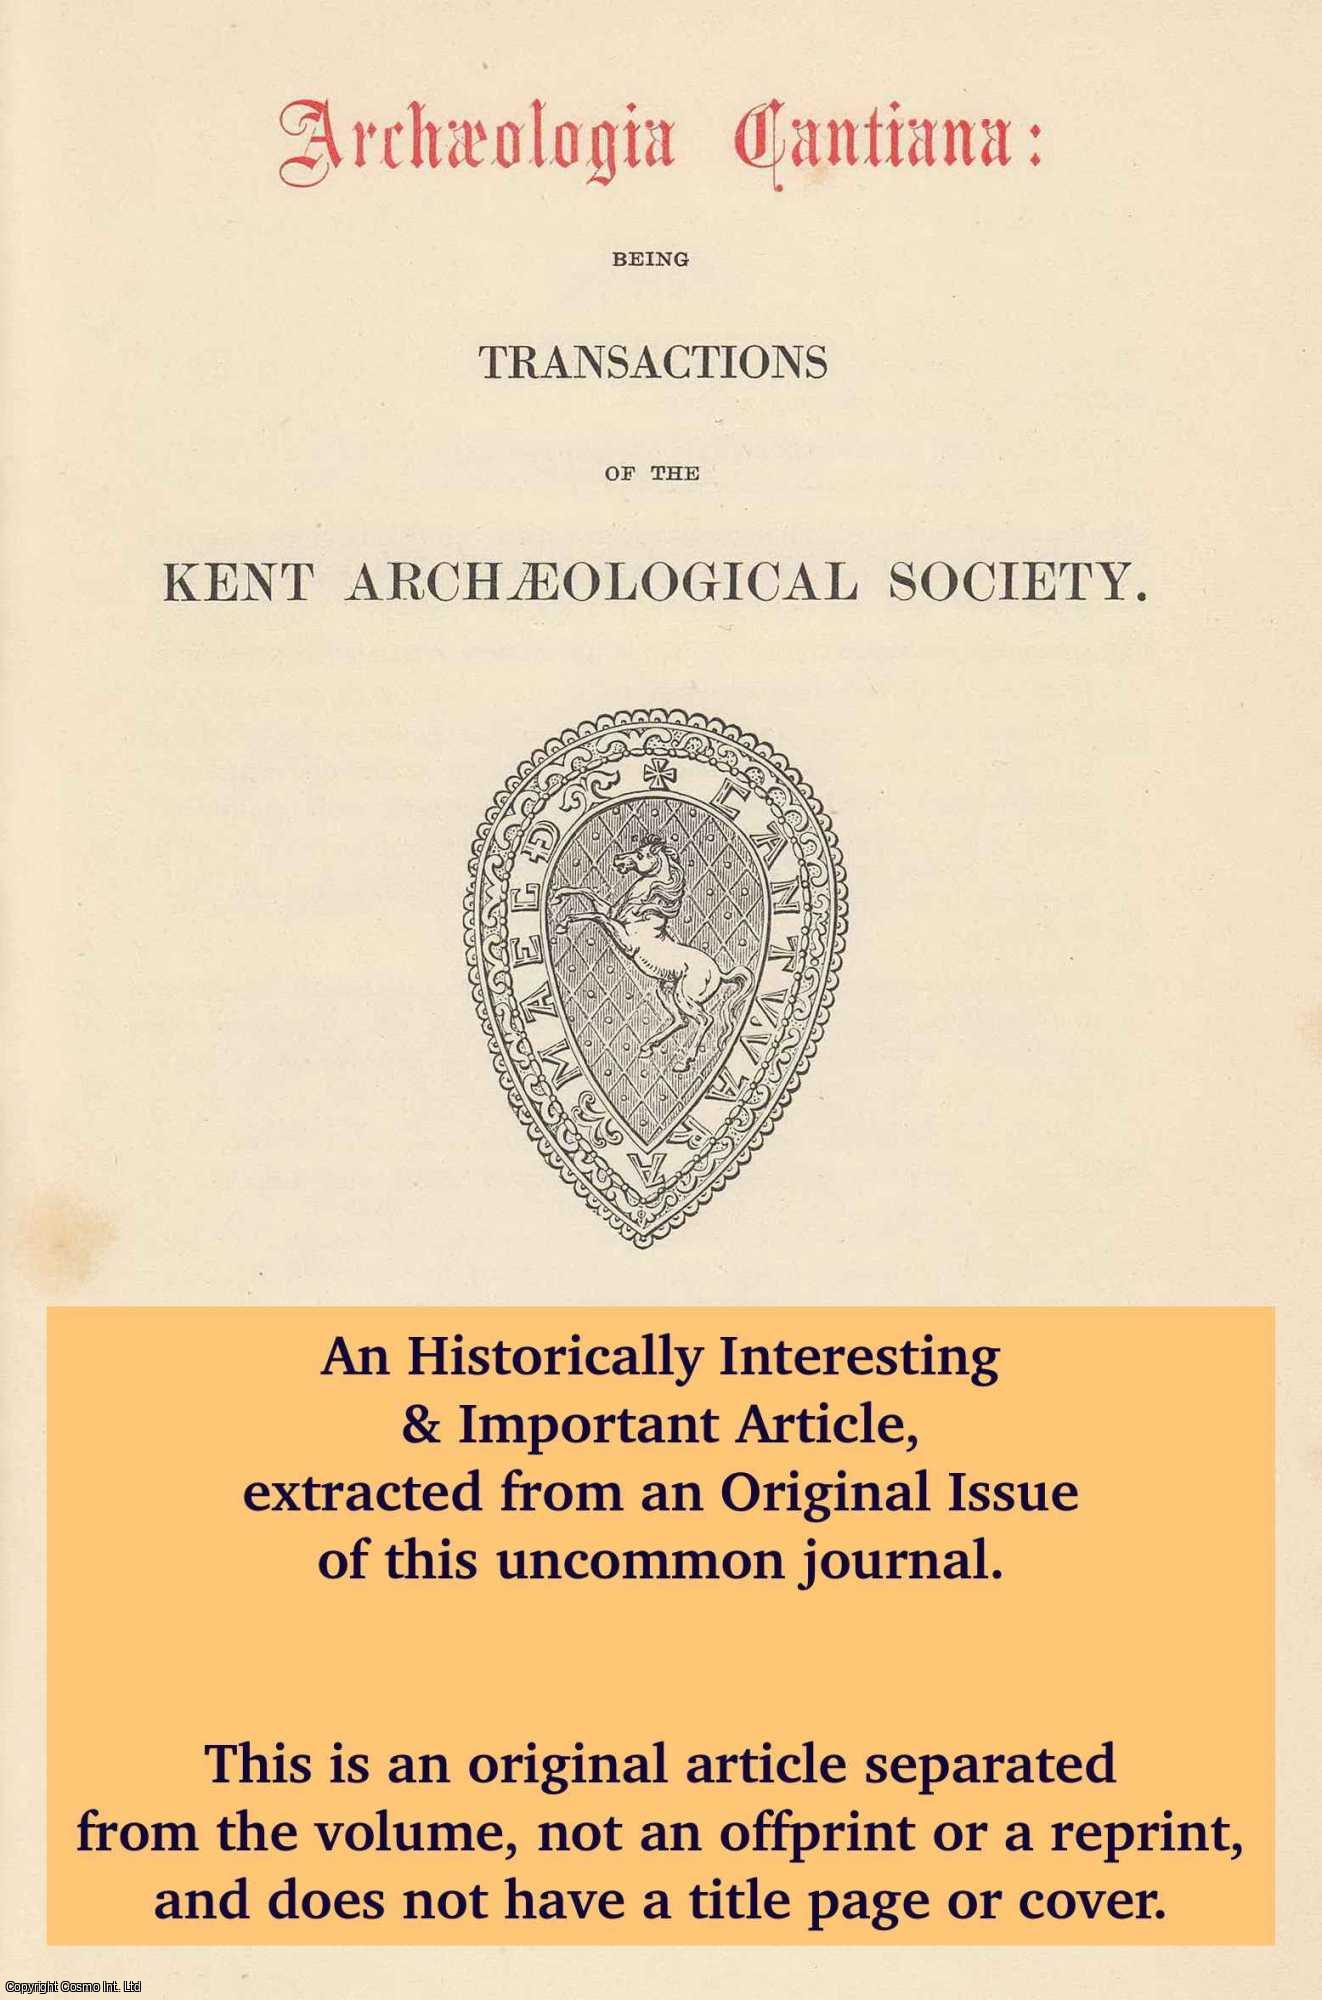 Mary Adams - History of the Demesne Farm at Appledore from Contemporary Buliding Records; Early Fourteenth Century. An original article from The Archaeologia Cantiana: Transactions of The Kent Archaeological Society, 1994.